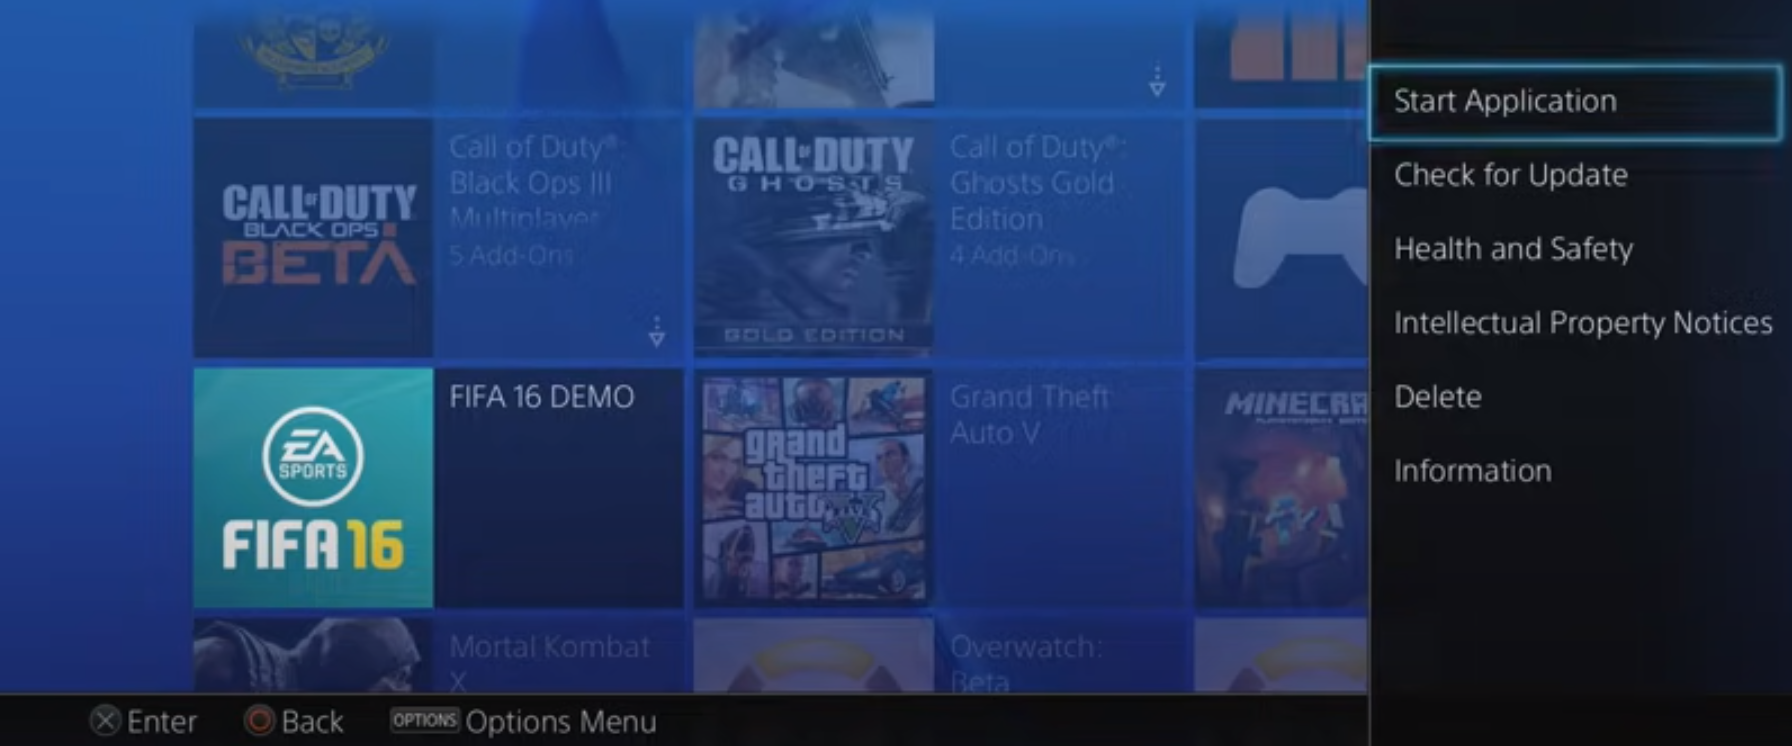 Deleting an Application from PS4. 